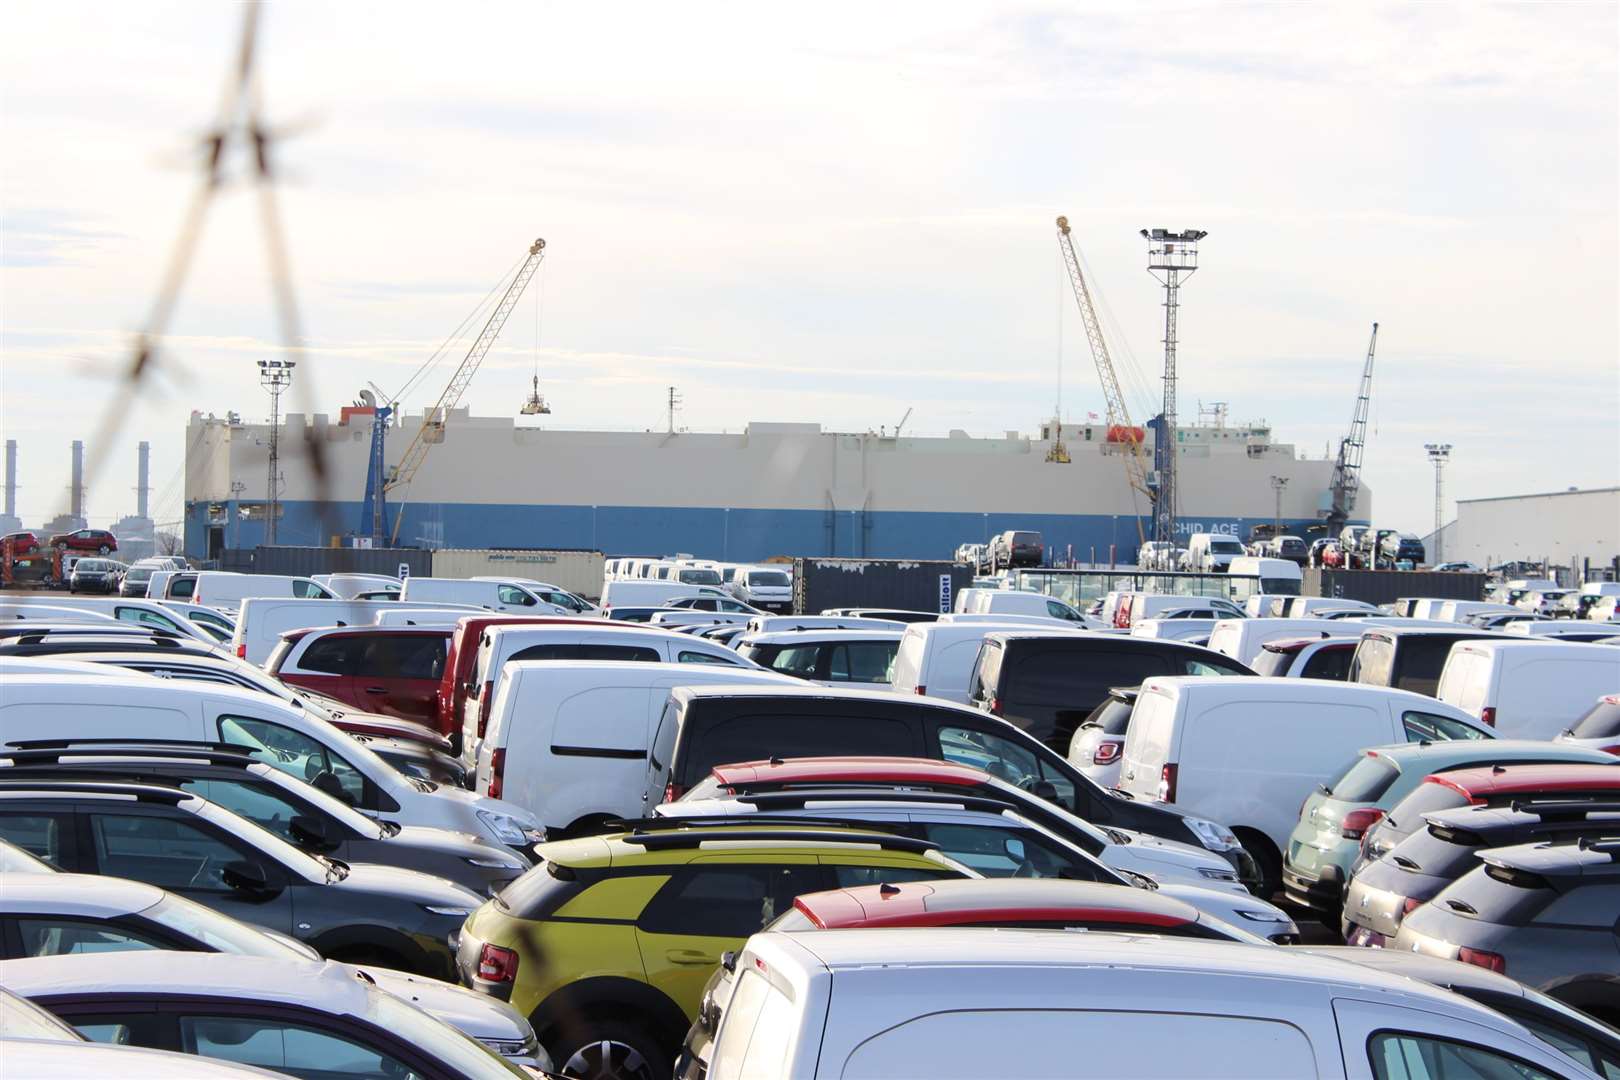 Cars parked after being unloaded from a ship at Sheerness docks